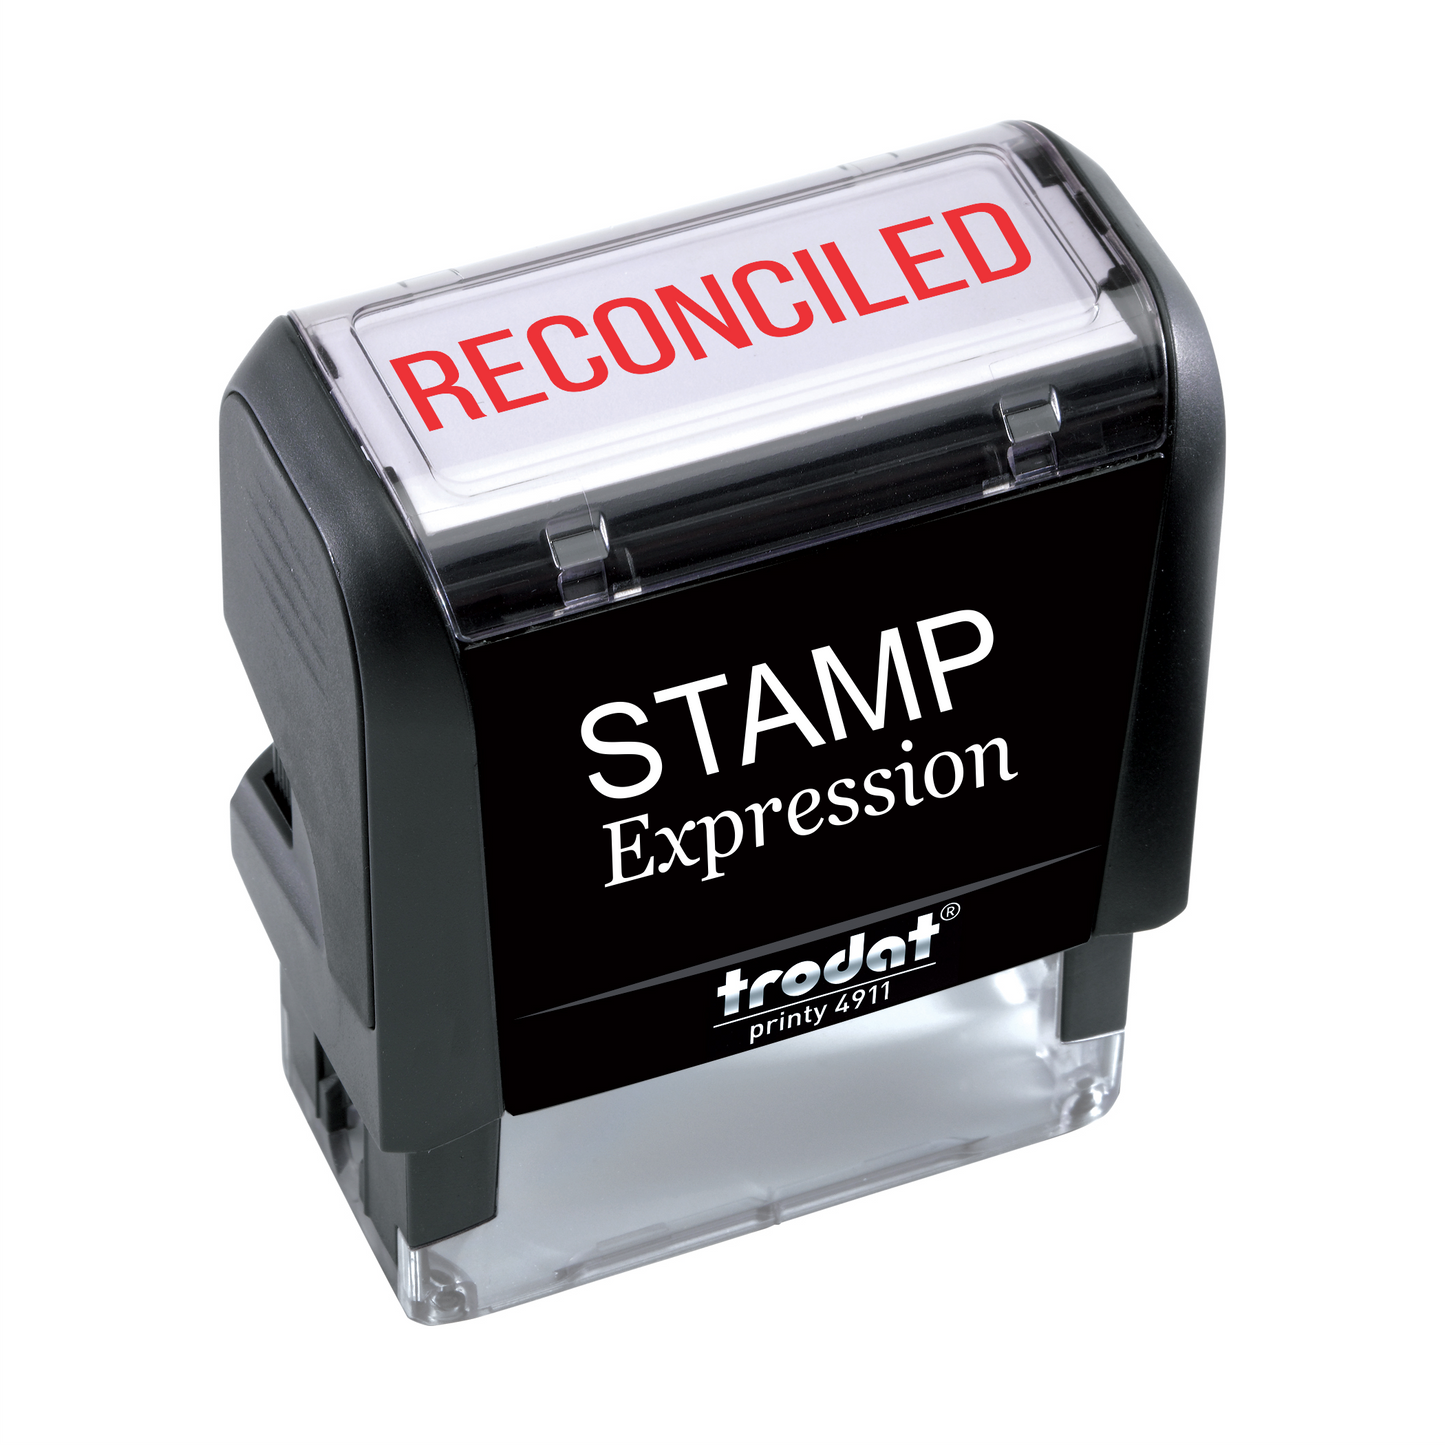 RECONCILED Office Self Inking Rubber Stamp (SH-5373)